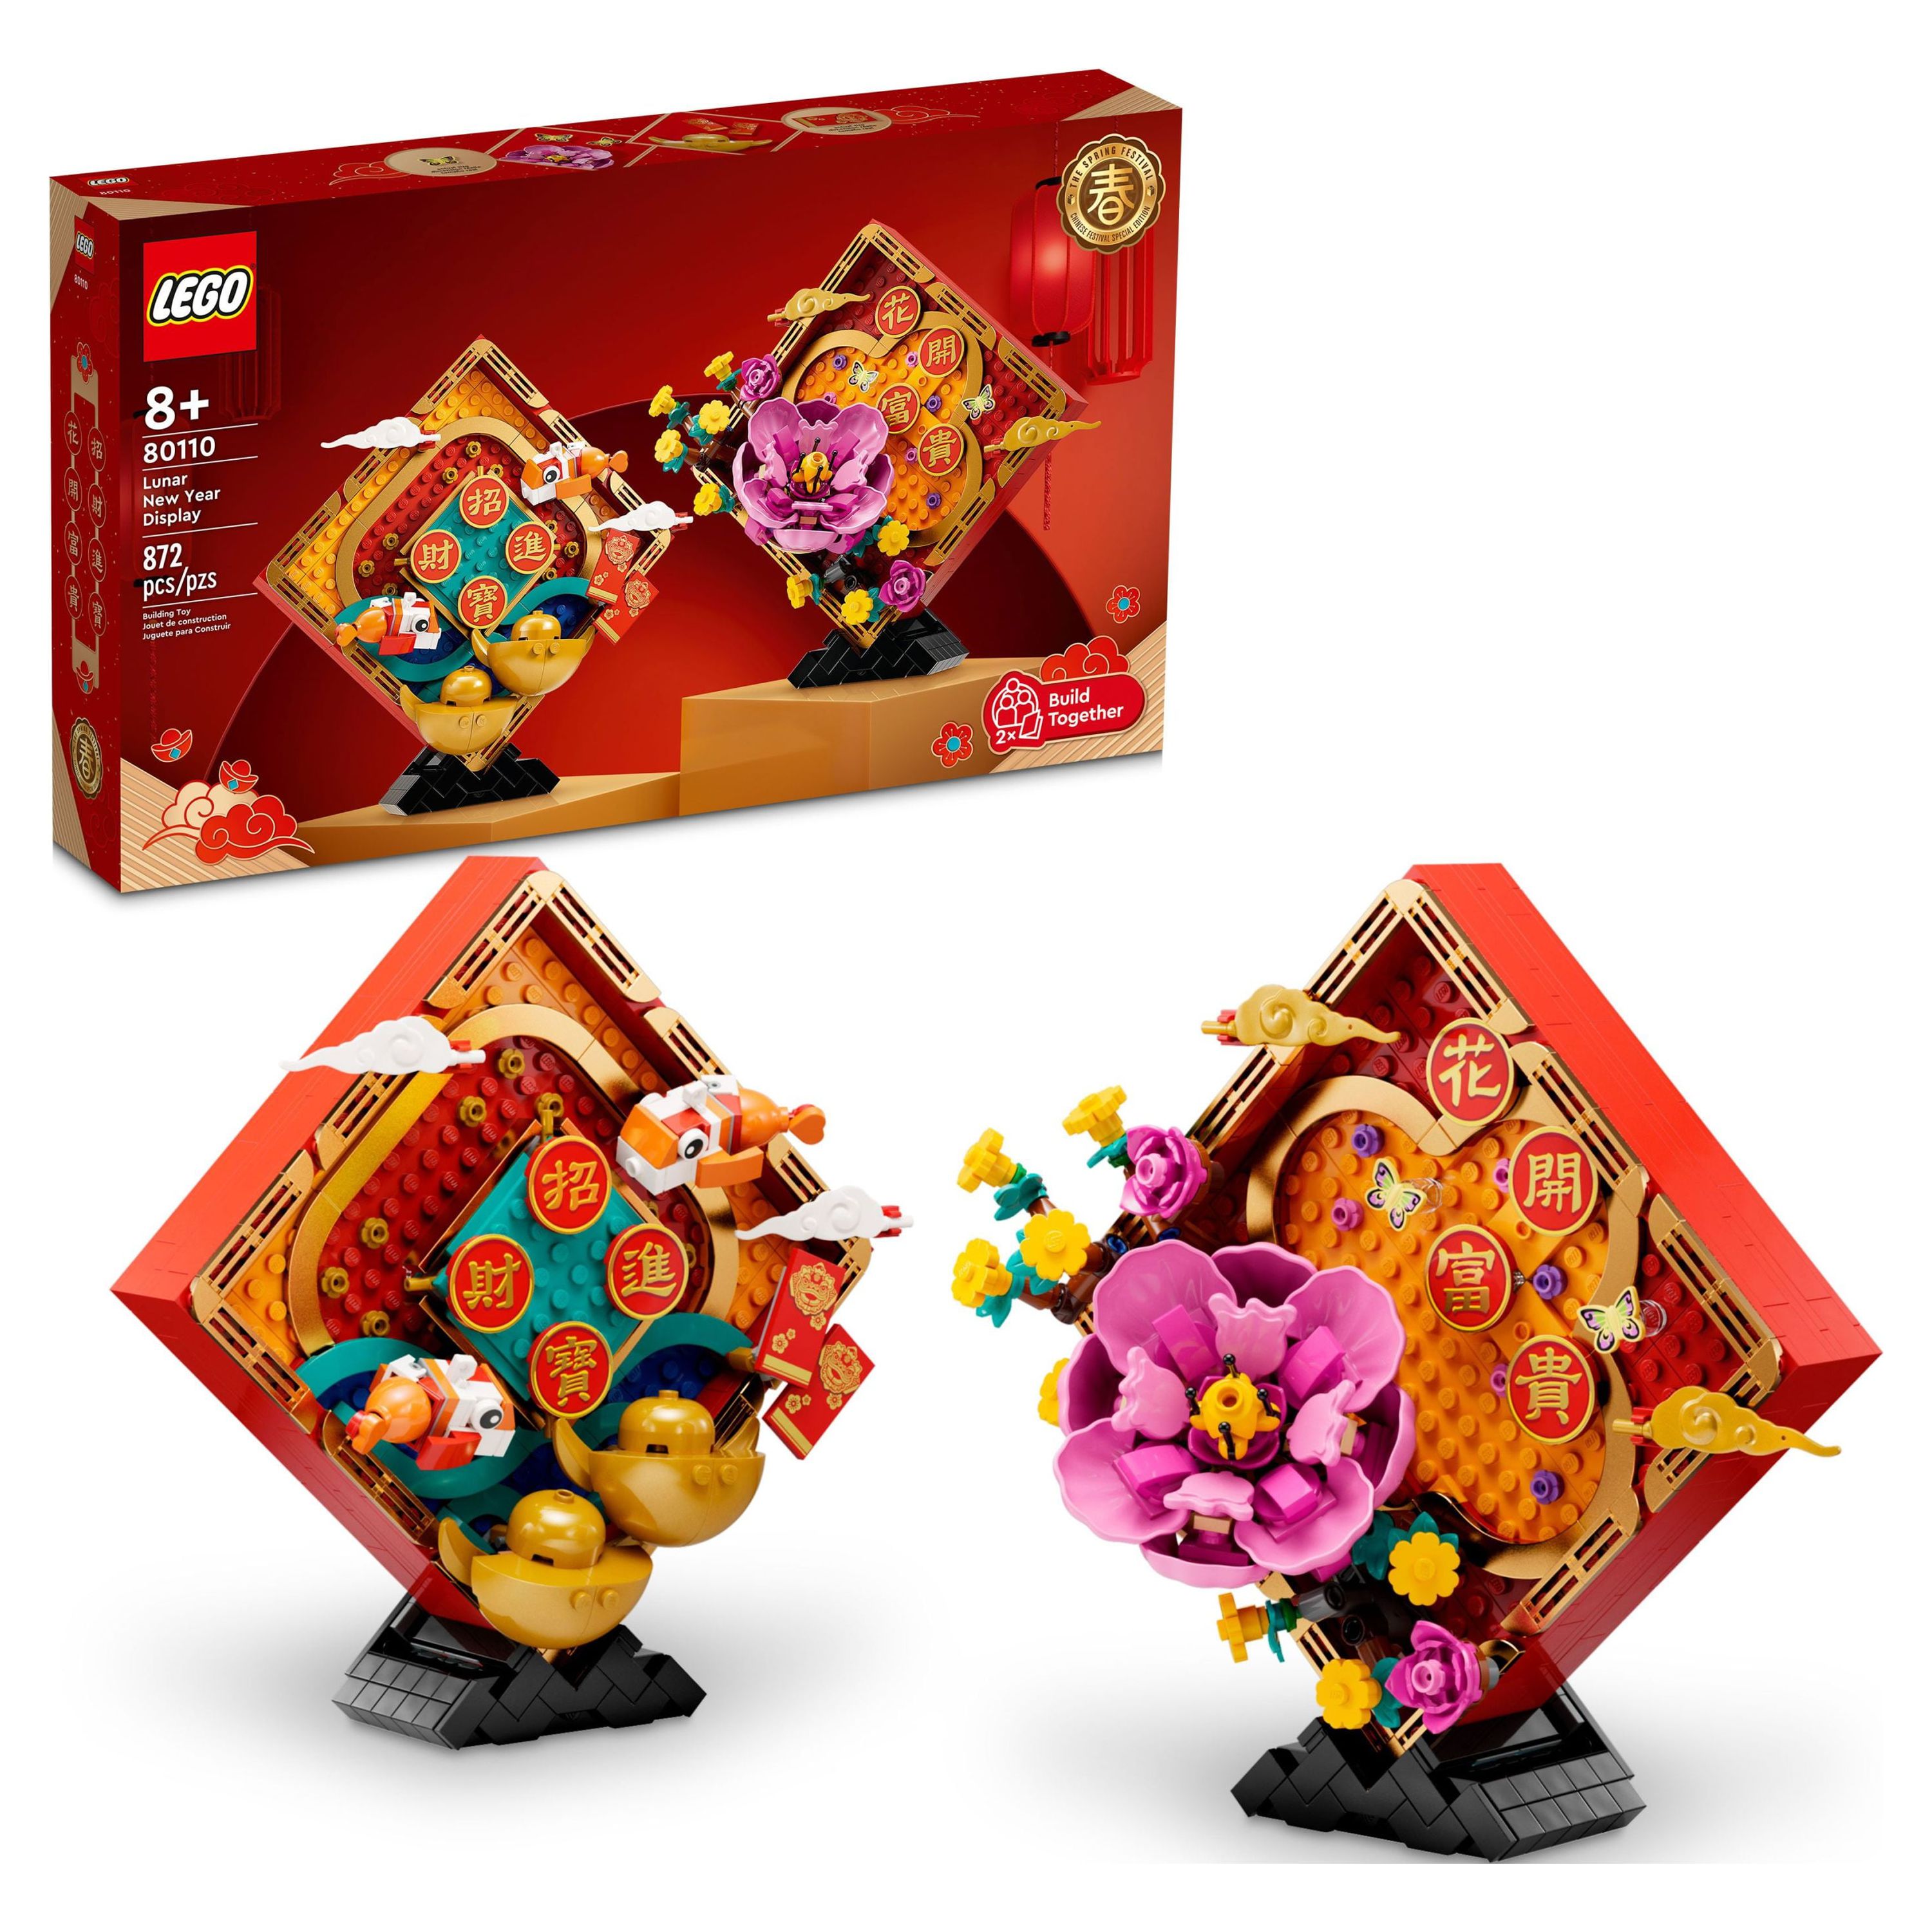 LEGO Lunar New Year Display 80110 Building Toy Set (872 Pieces) - image 1 of 8